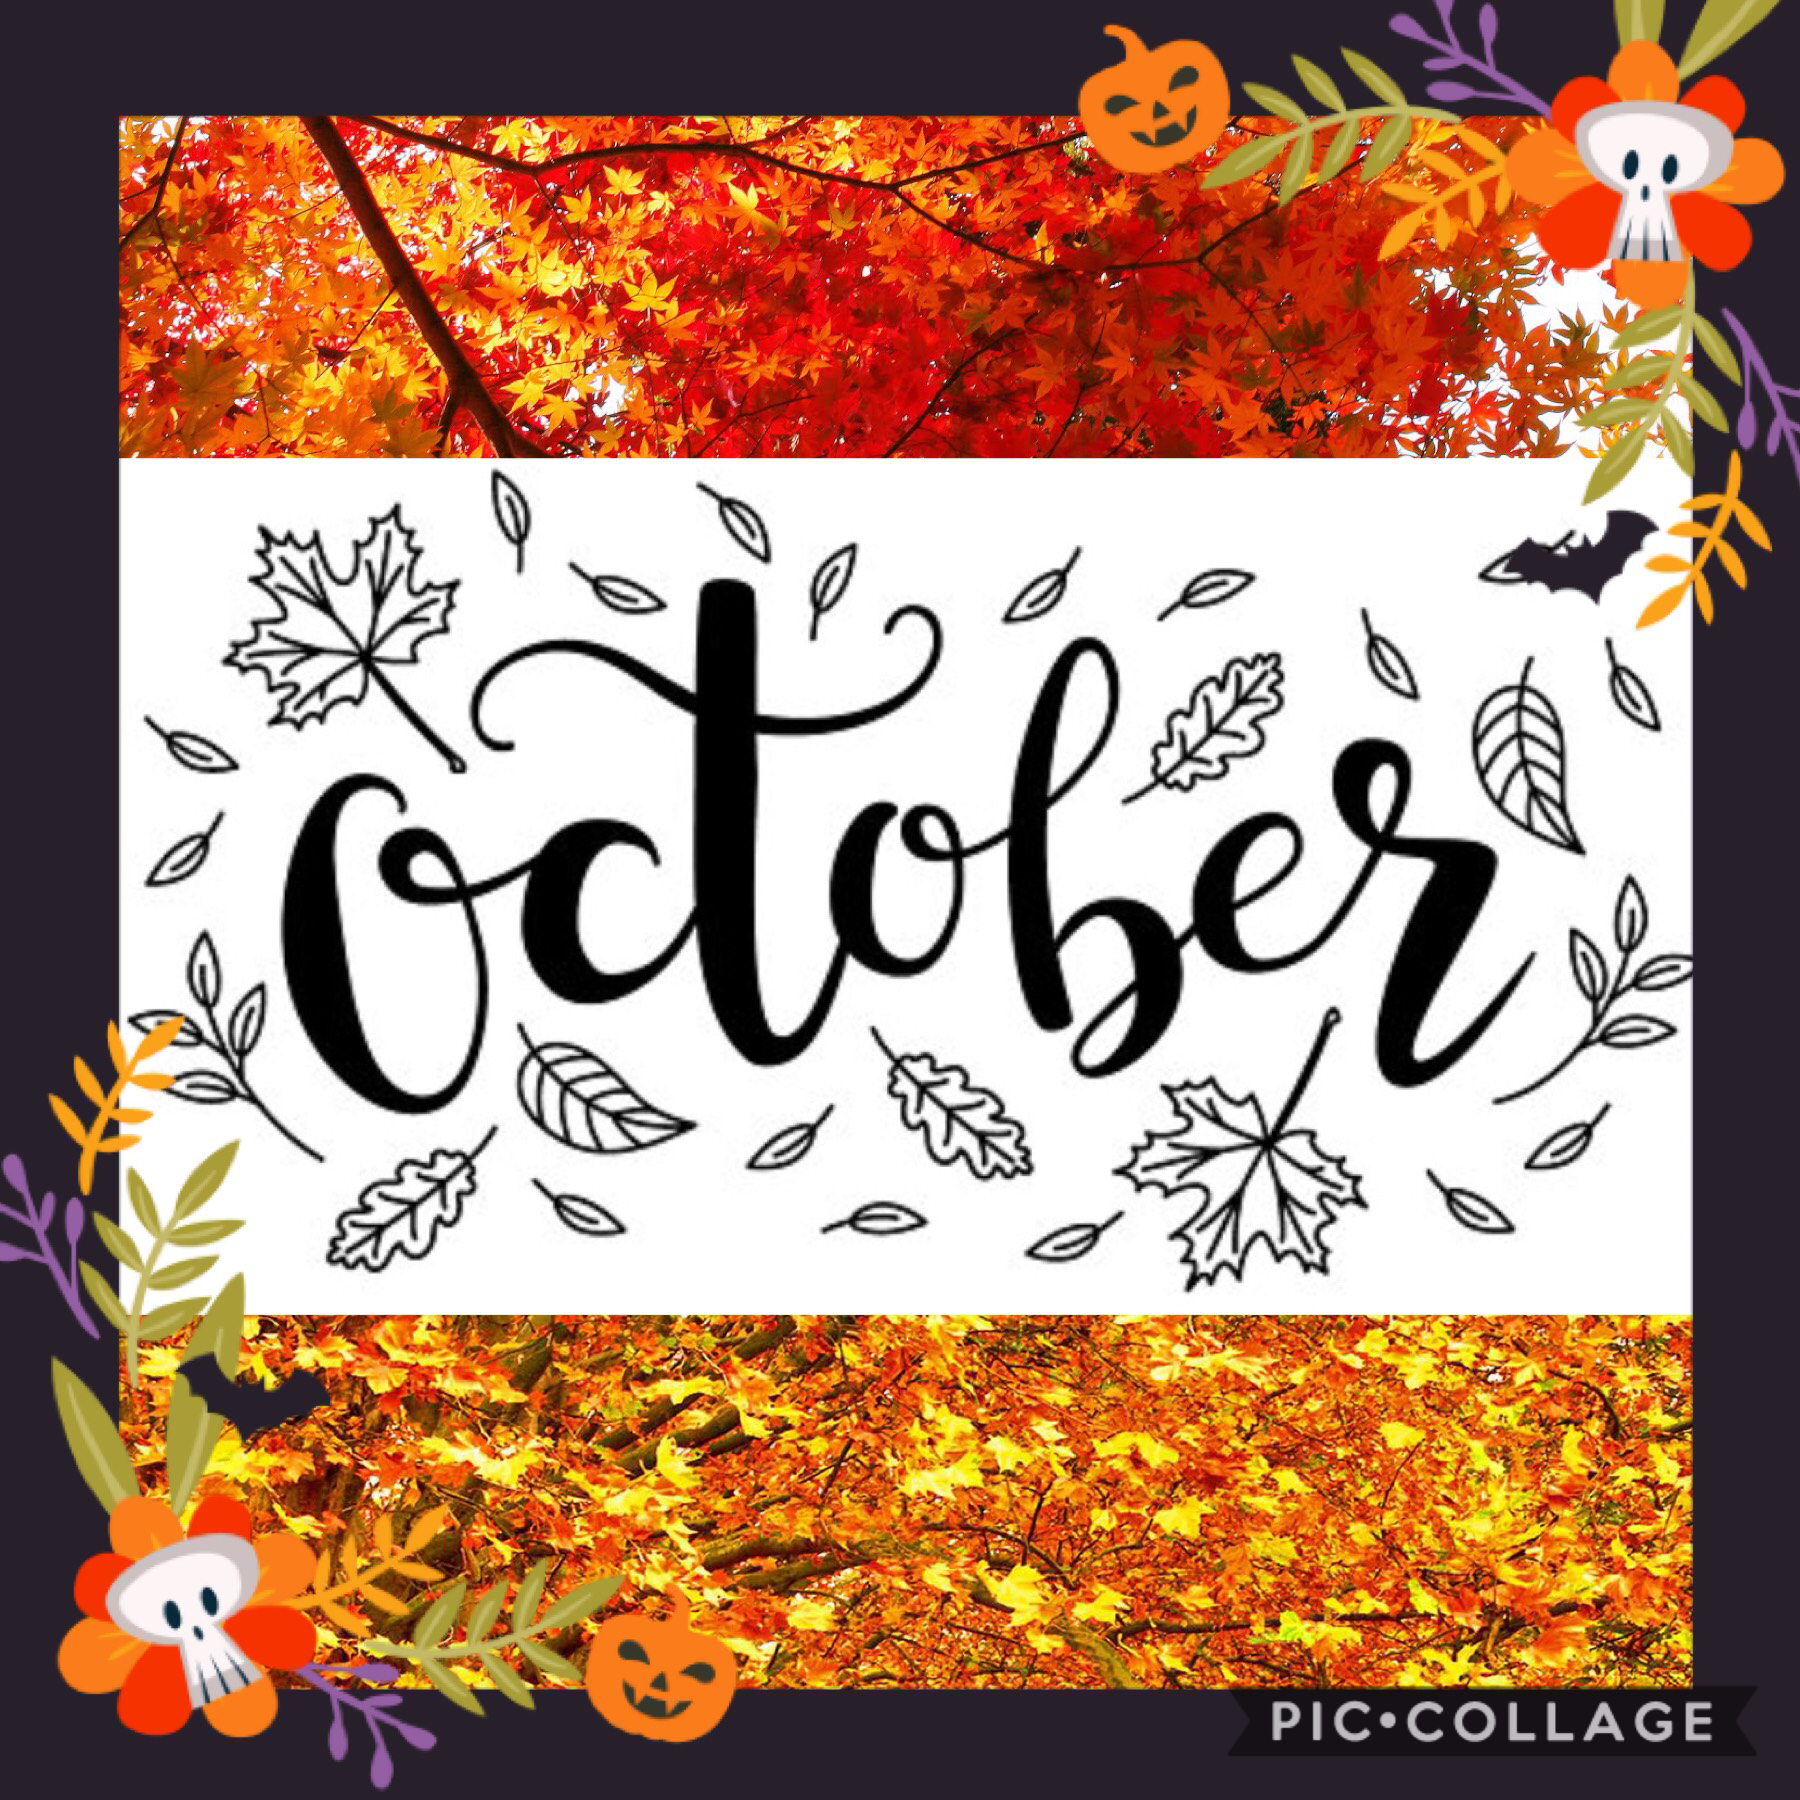 🍂🍁Tap🍁🍂
Less than a week until Halloween!!!😆
Qotd: What are you going to be for Halloween?🎃👻
Aotd: Gryffindor witch from Harry Potter! ⚡️❤️💚💙💛🦁
🧡🖤🧡🖤🧡🖤🧡🖤🧡🖤🧡🖤🧡🖤🧡🖤🧡🖤🧡🖤🧡🖤🧡